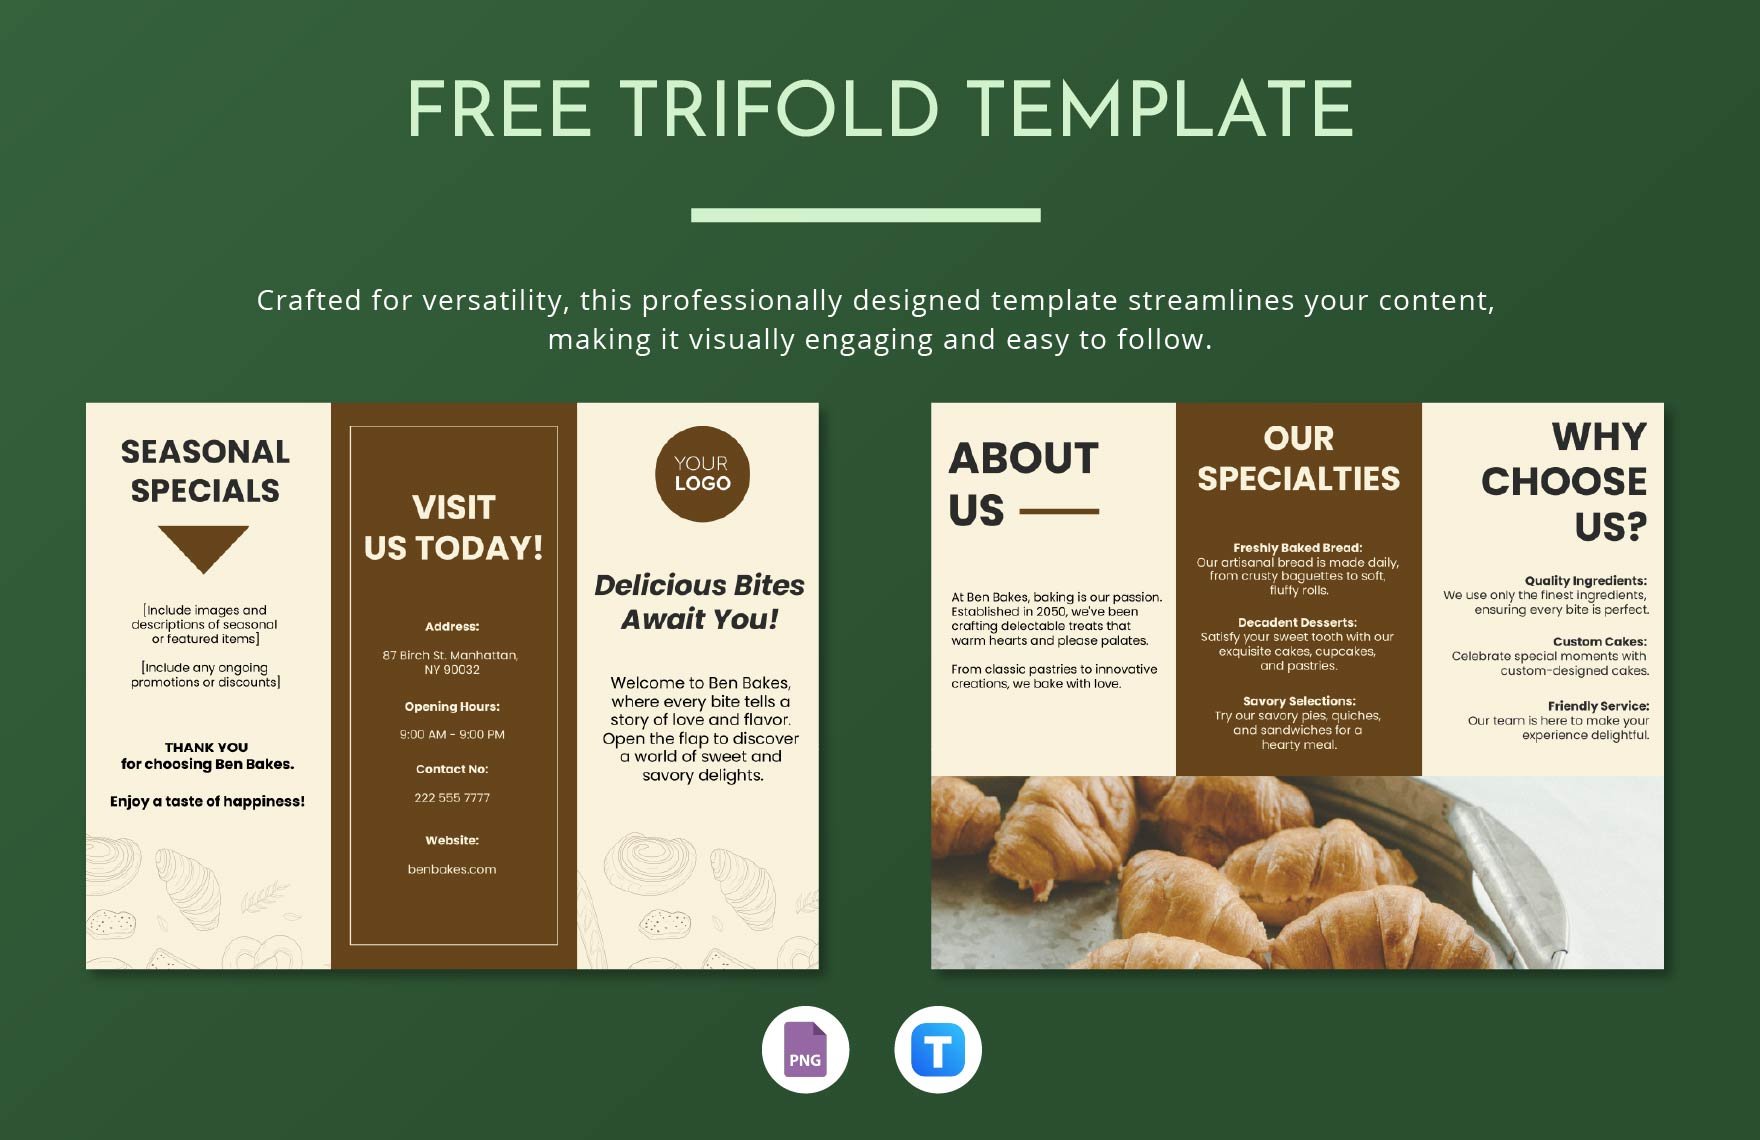 Free Trifold Template